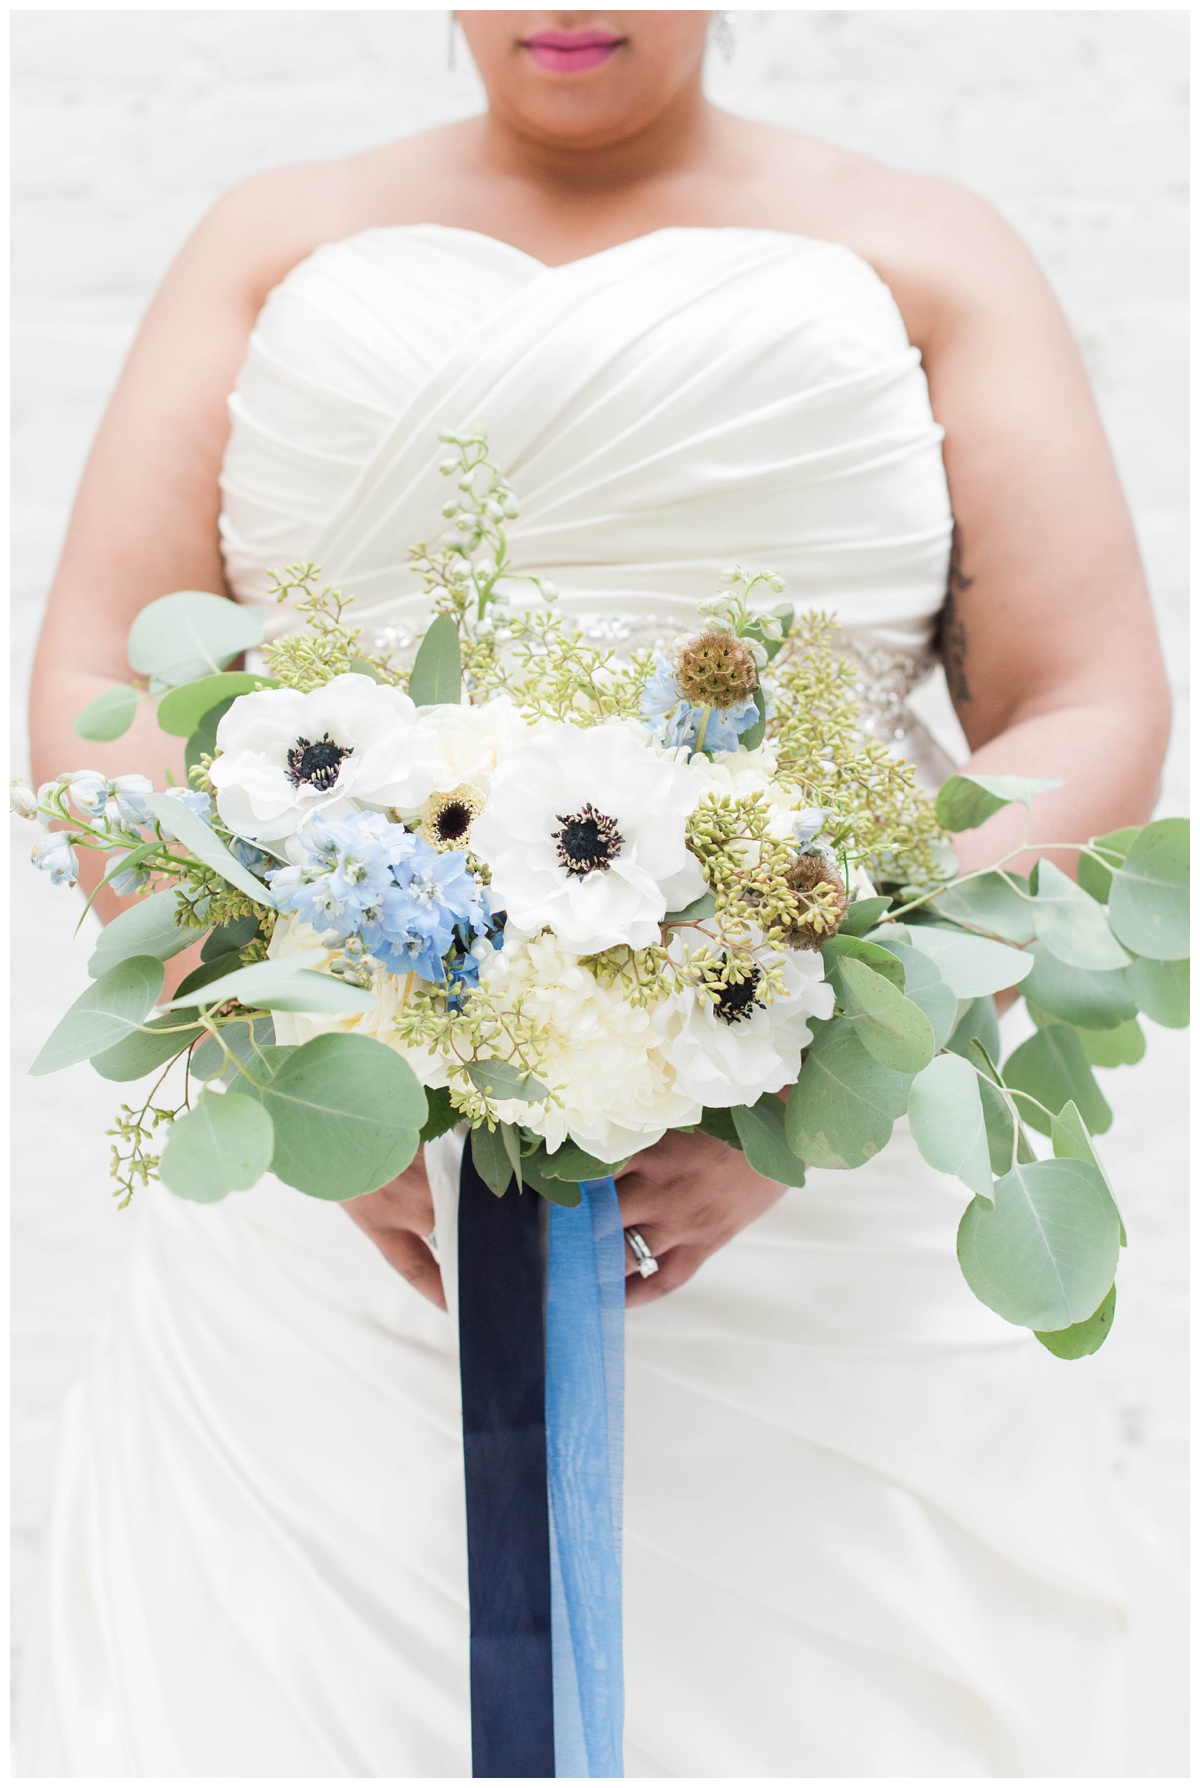 shades of blue wedding inspiration at quirk hotel in richmond virginia by rva wedding photographer sarah & dave photography bride getting ready photo inspiration